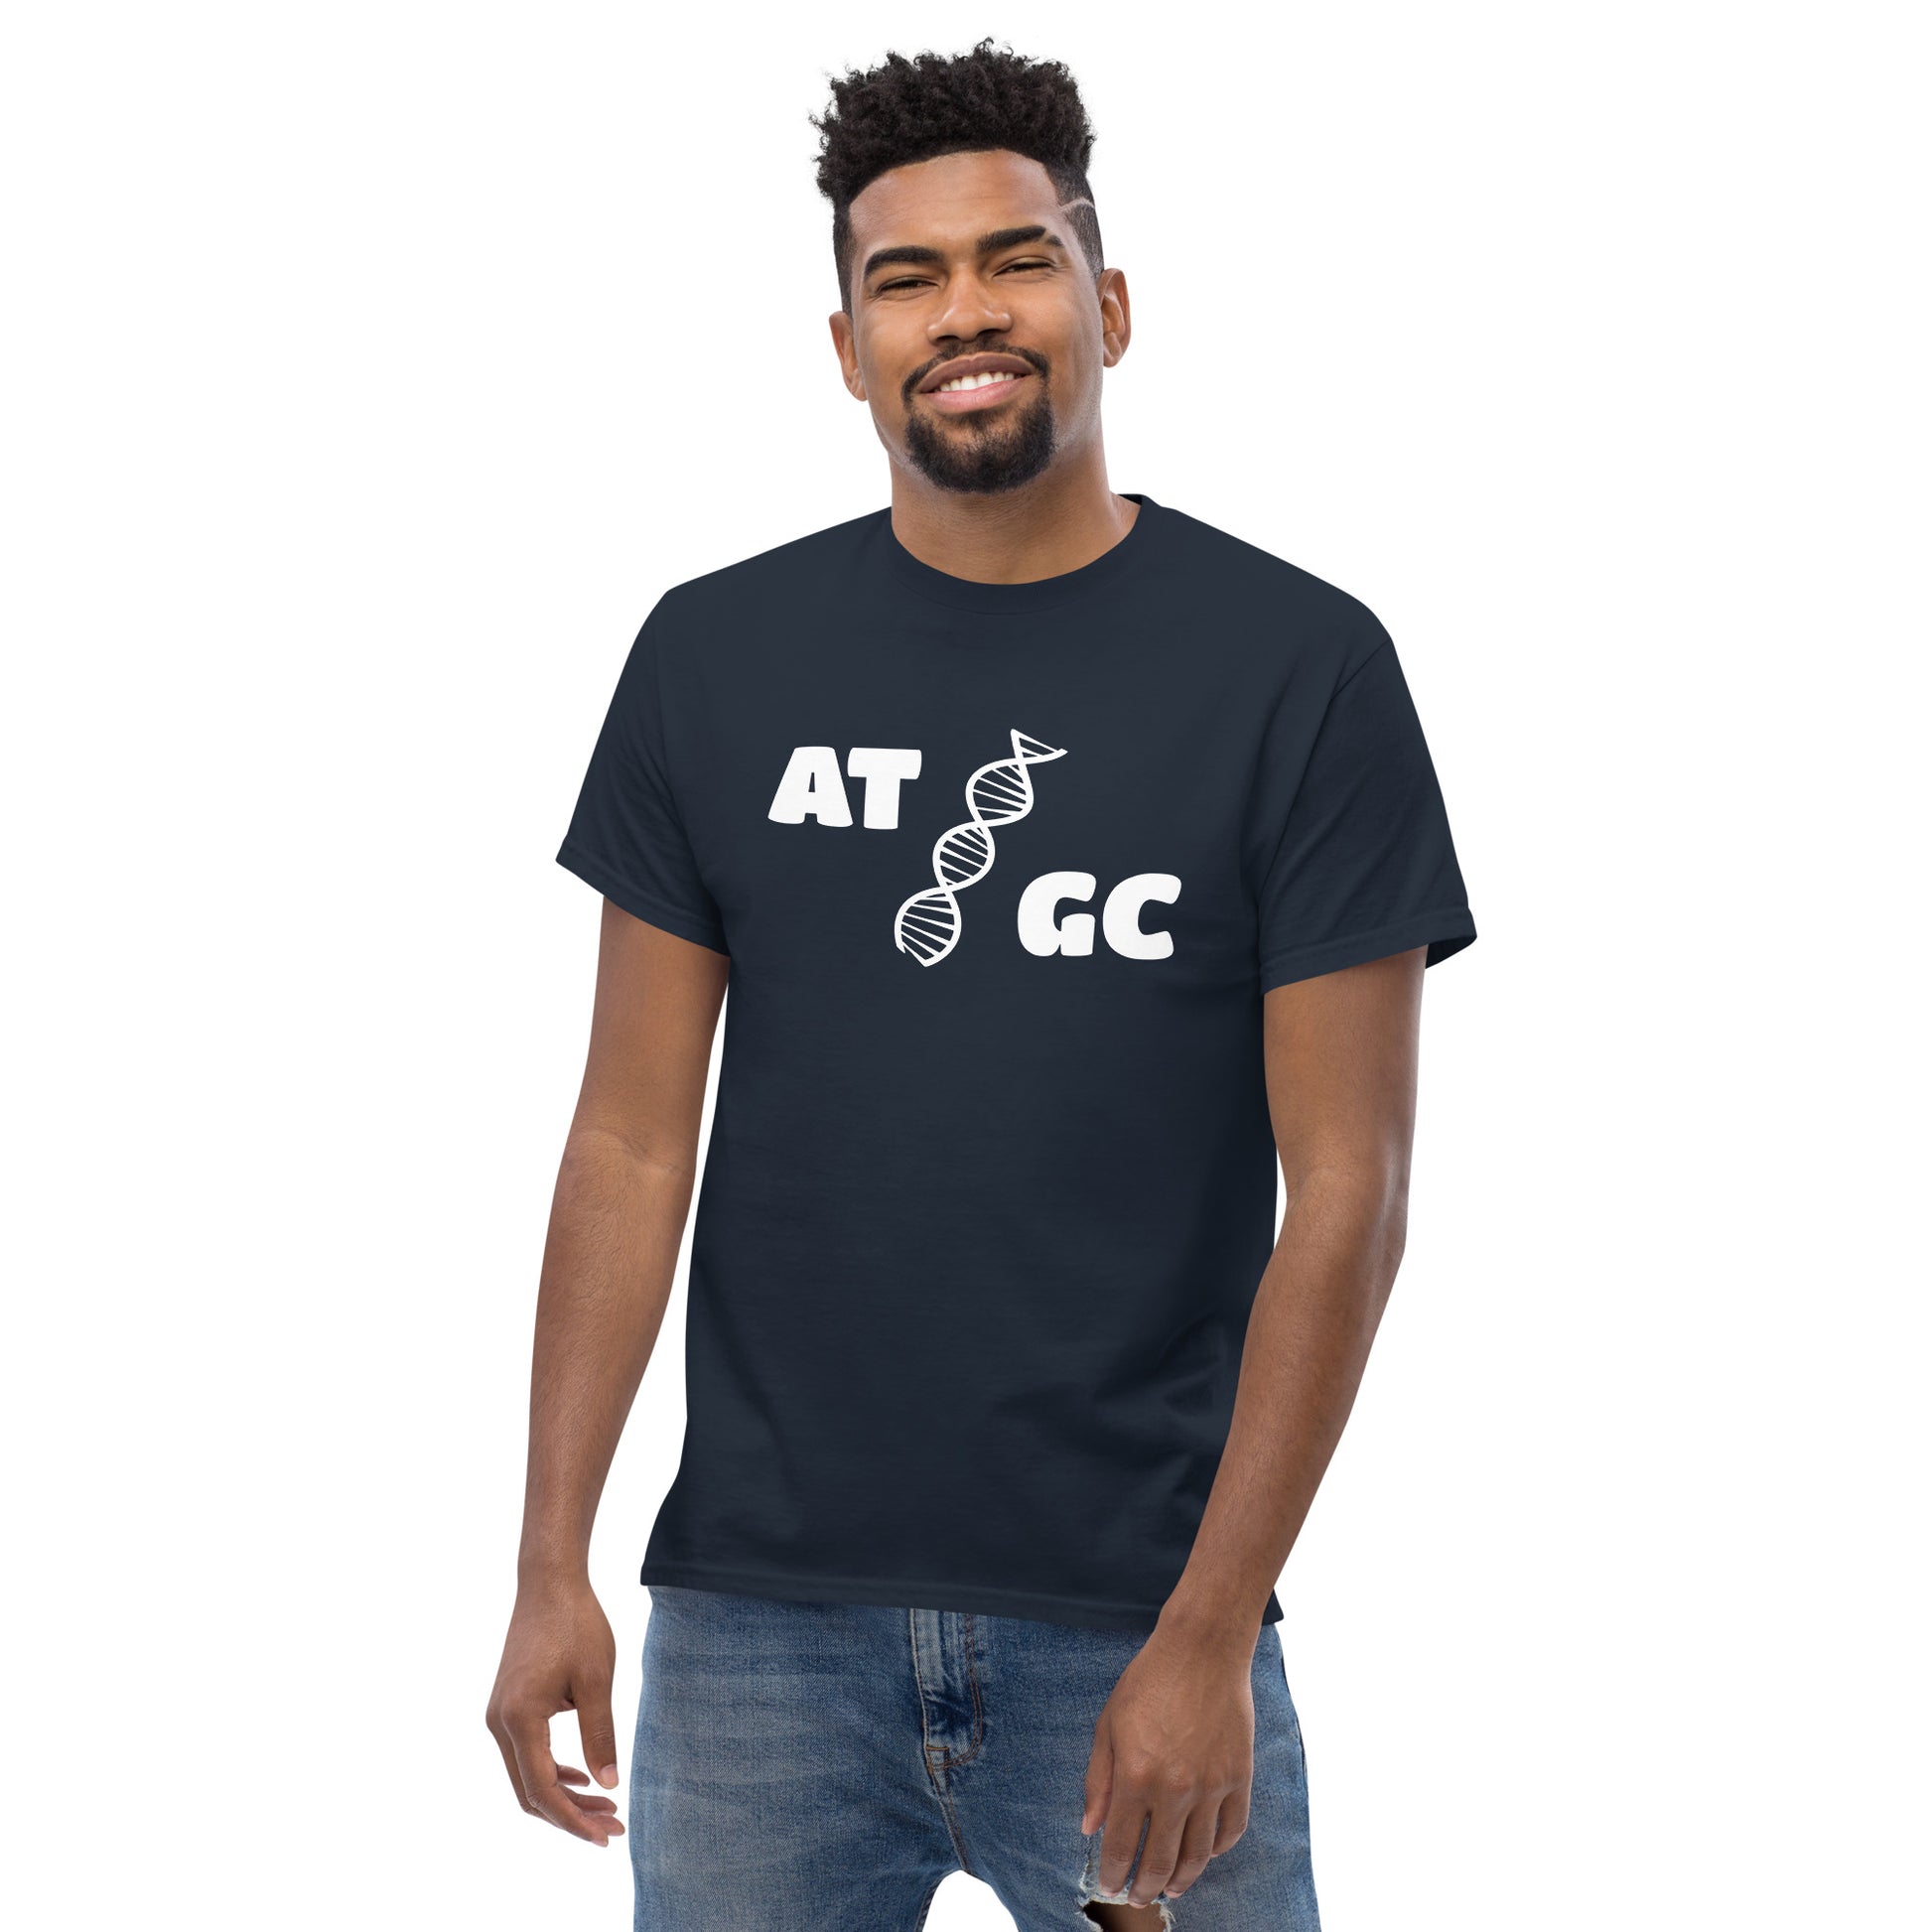 Men with navy blue t-shirt with image of a DNA string and the text "ATGC"